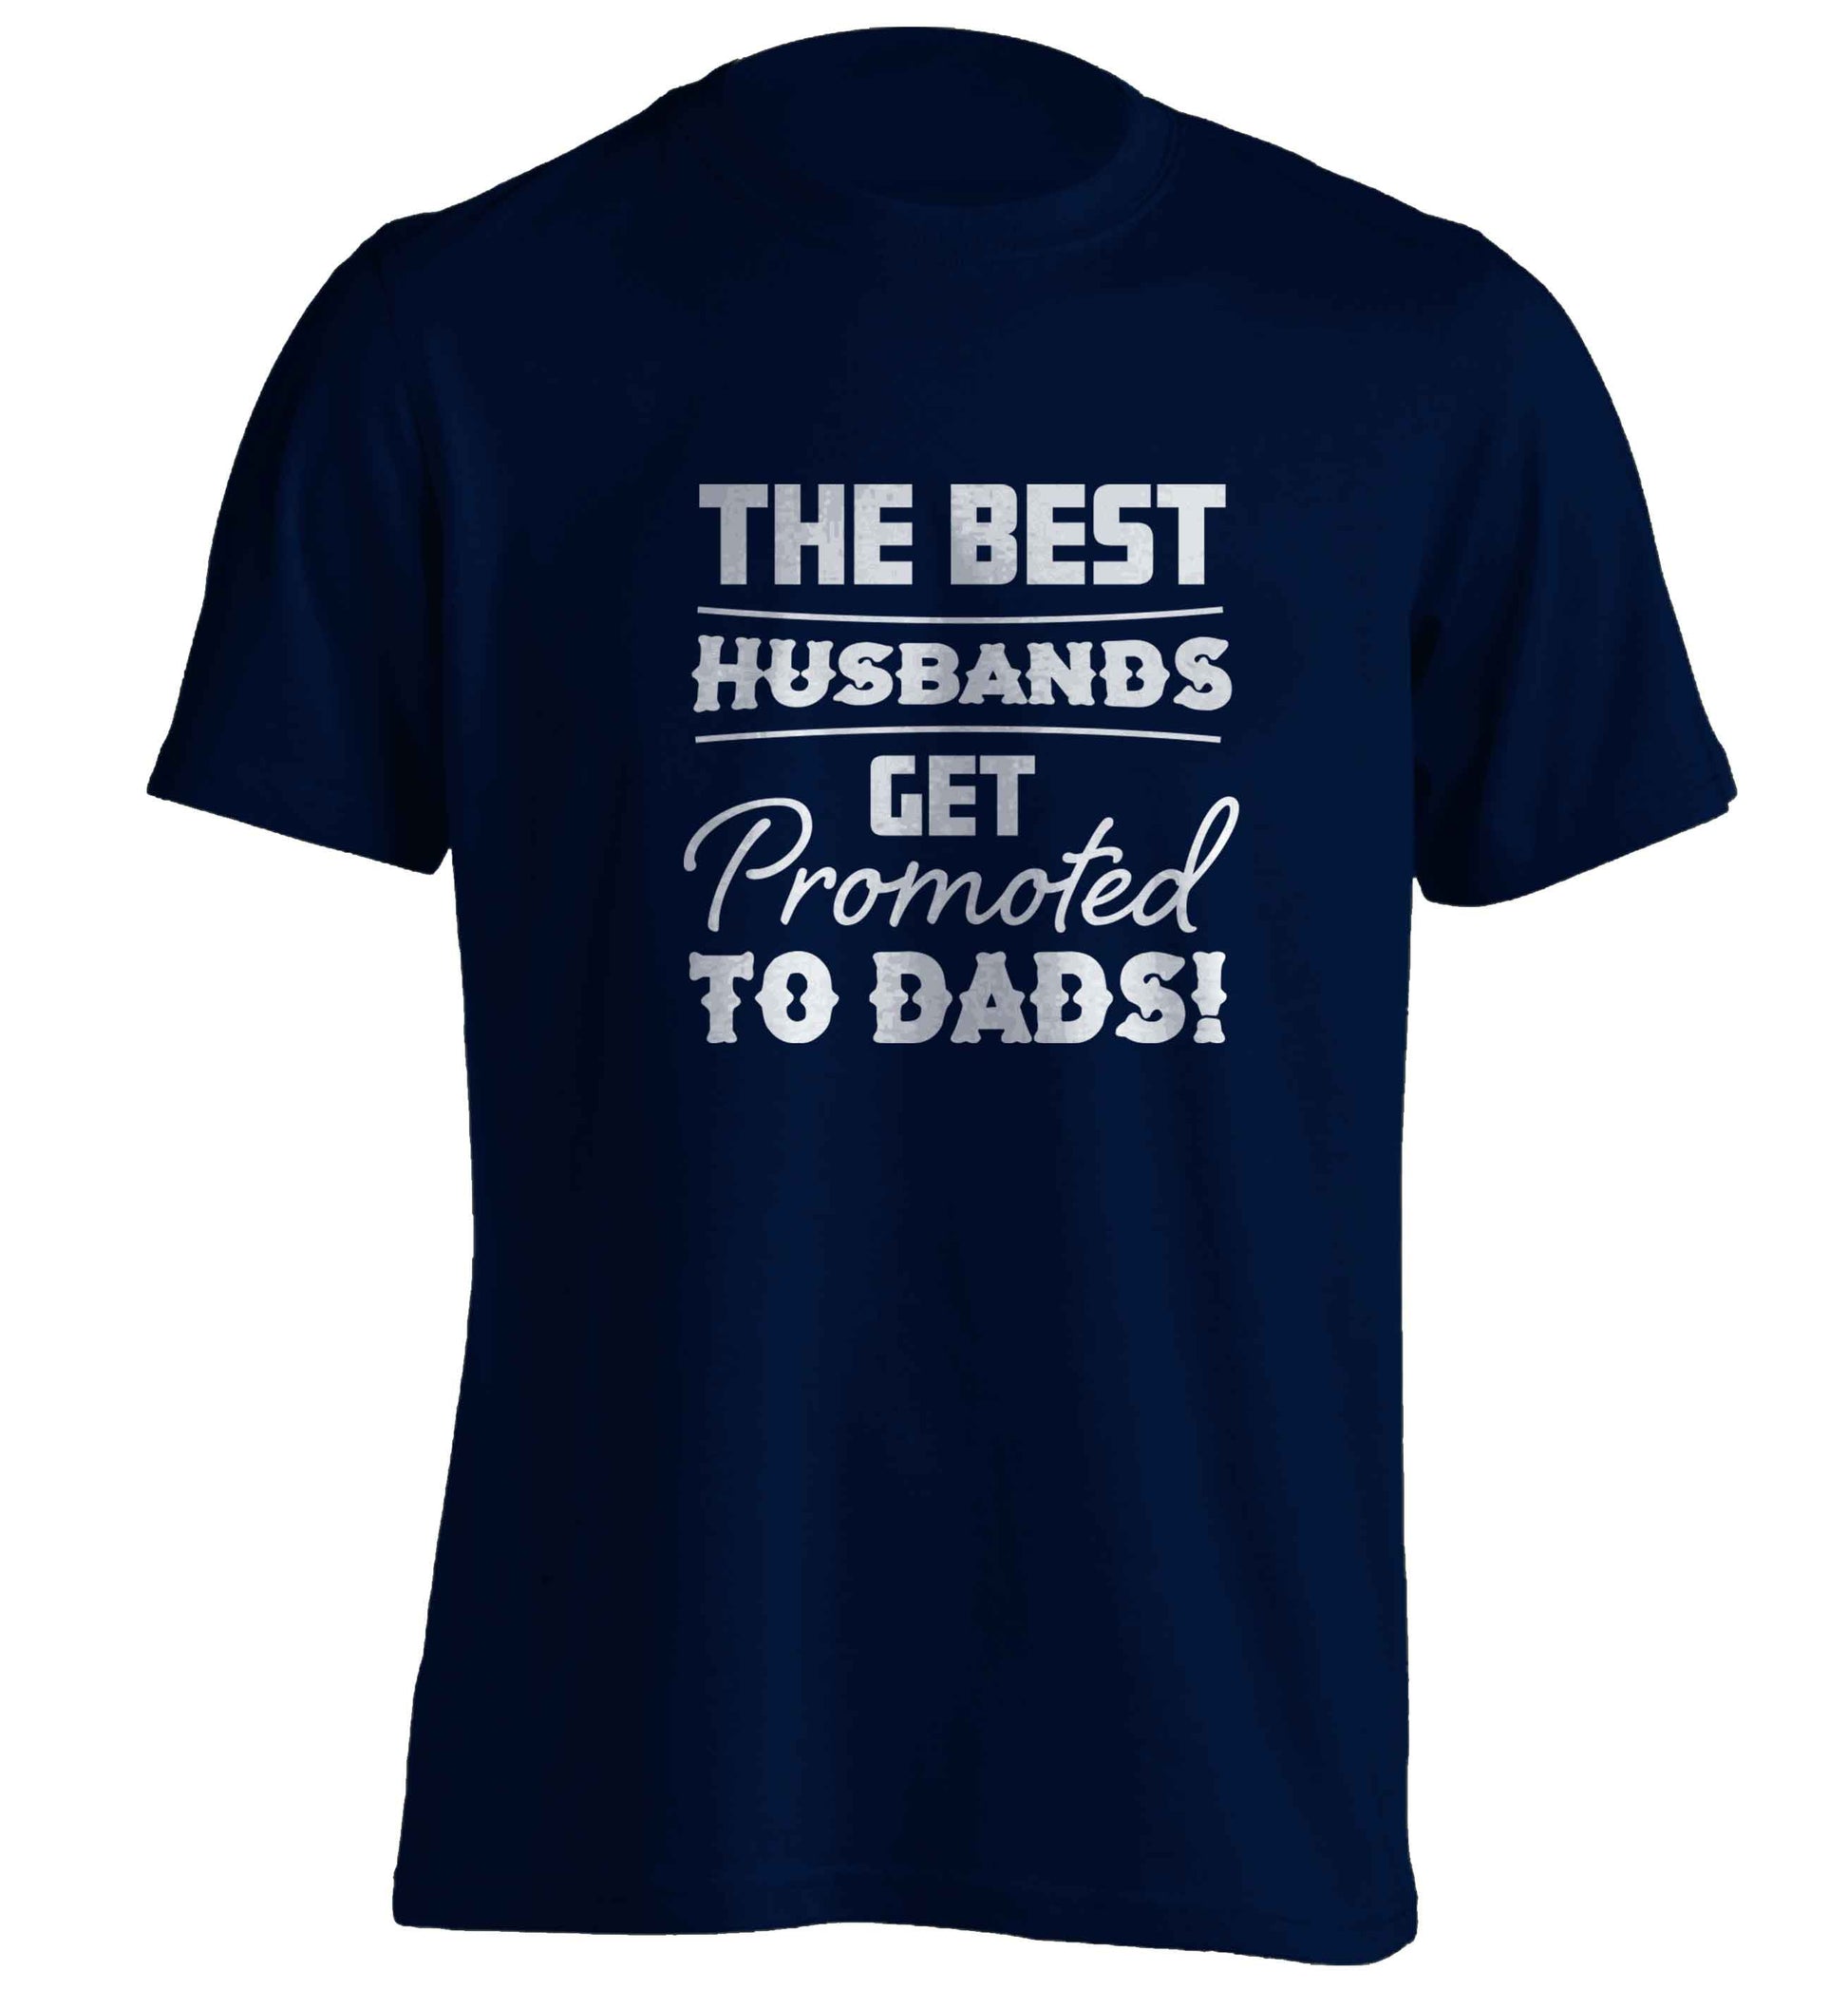 The best husbands get promoted to Dads adults unisex navy Tshirt 2XL